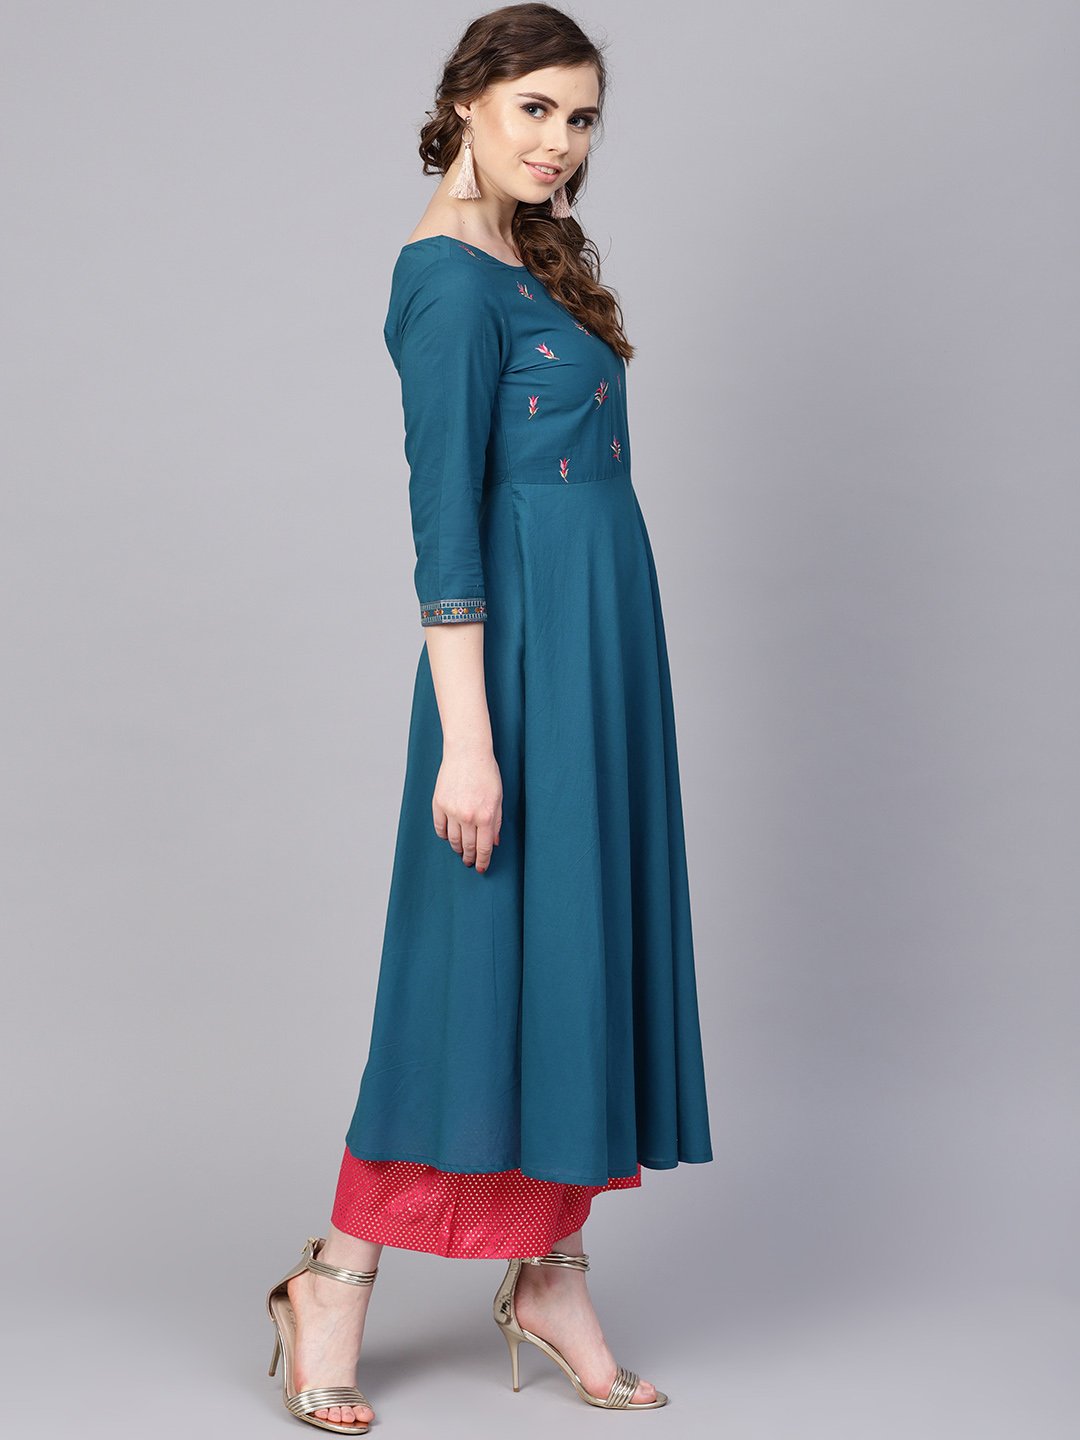 Women's Teal Blue Embroidered Kurta With Round Neck & 3/4 Sleeves - Nayo Clothing